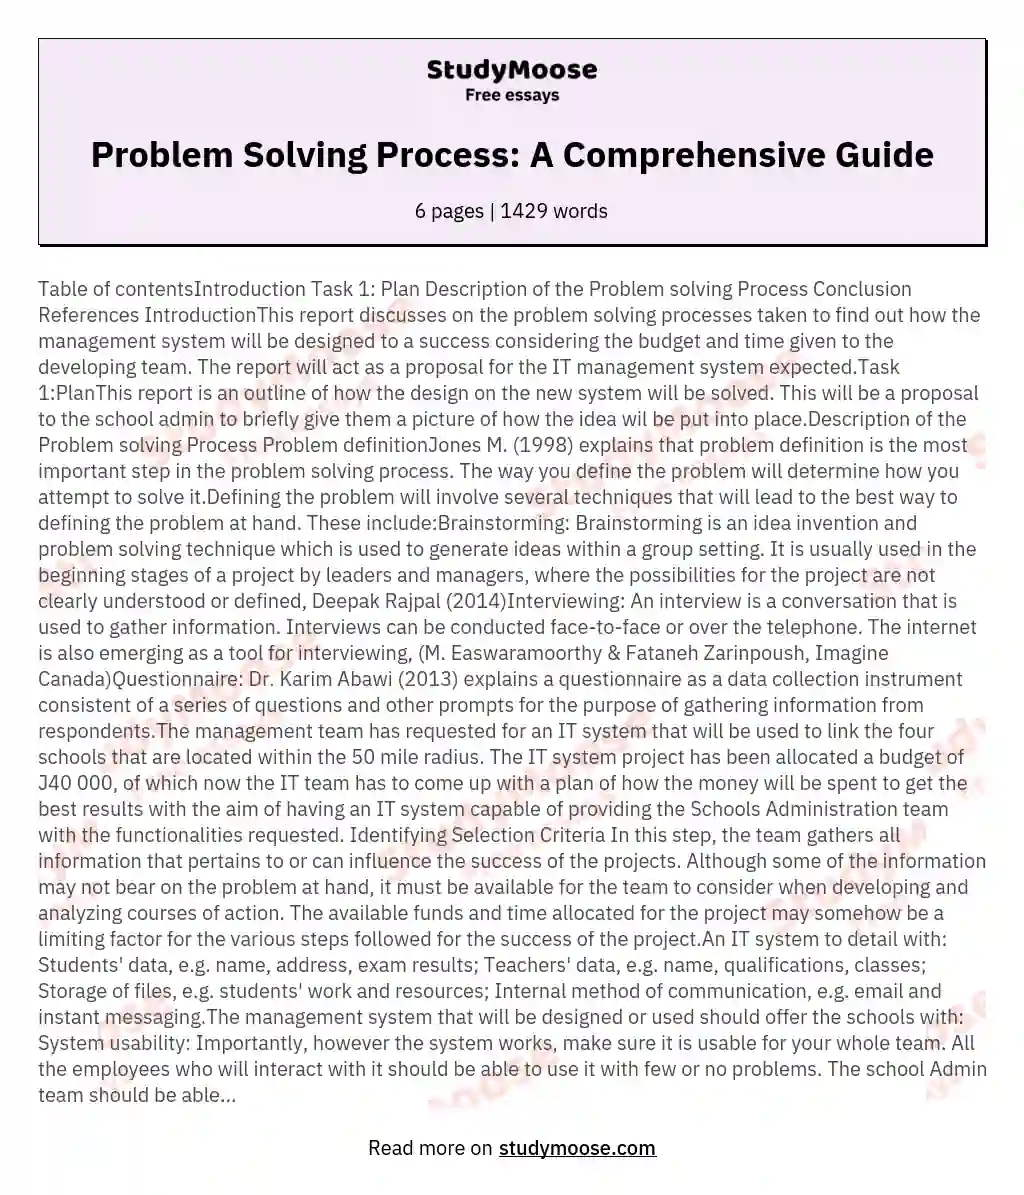 Table of contentsIntroduction Task 1 Plan Description of the Problem solving Process Conclusion References IntroductionThis report discusses on